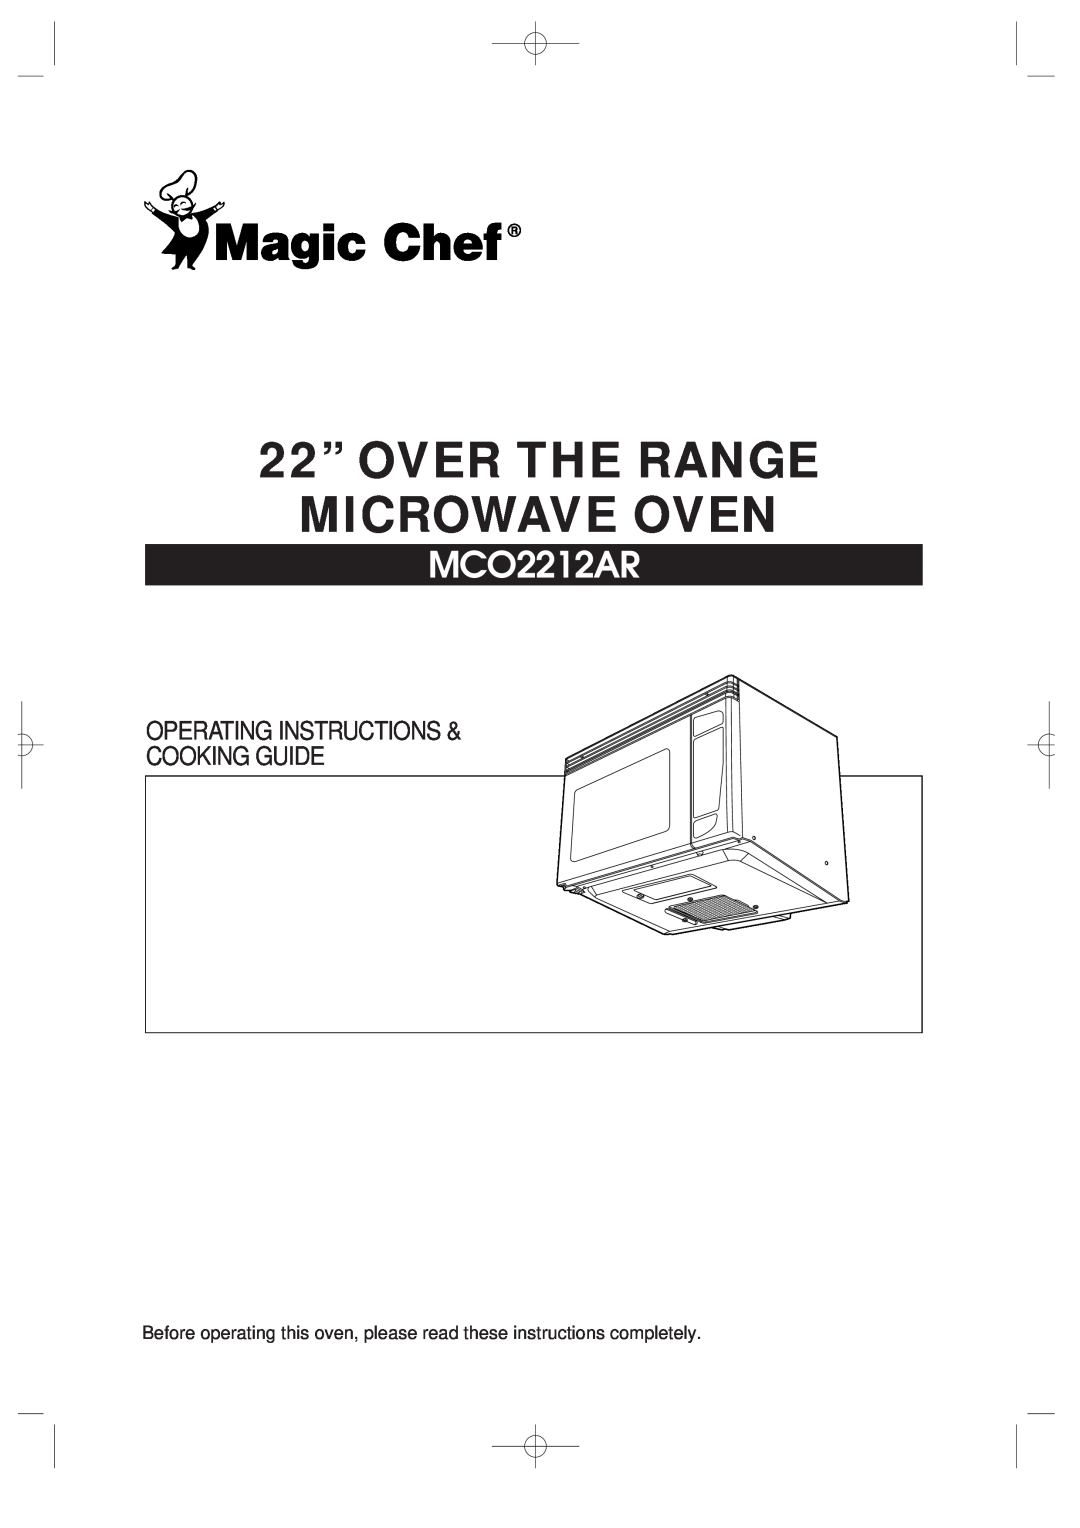 Magic Chef MCO2212AR manual 22” OVER THE RANGE MICROWAVE OVEN, Operating Instructions Cooking Guide 